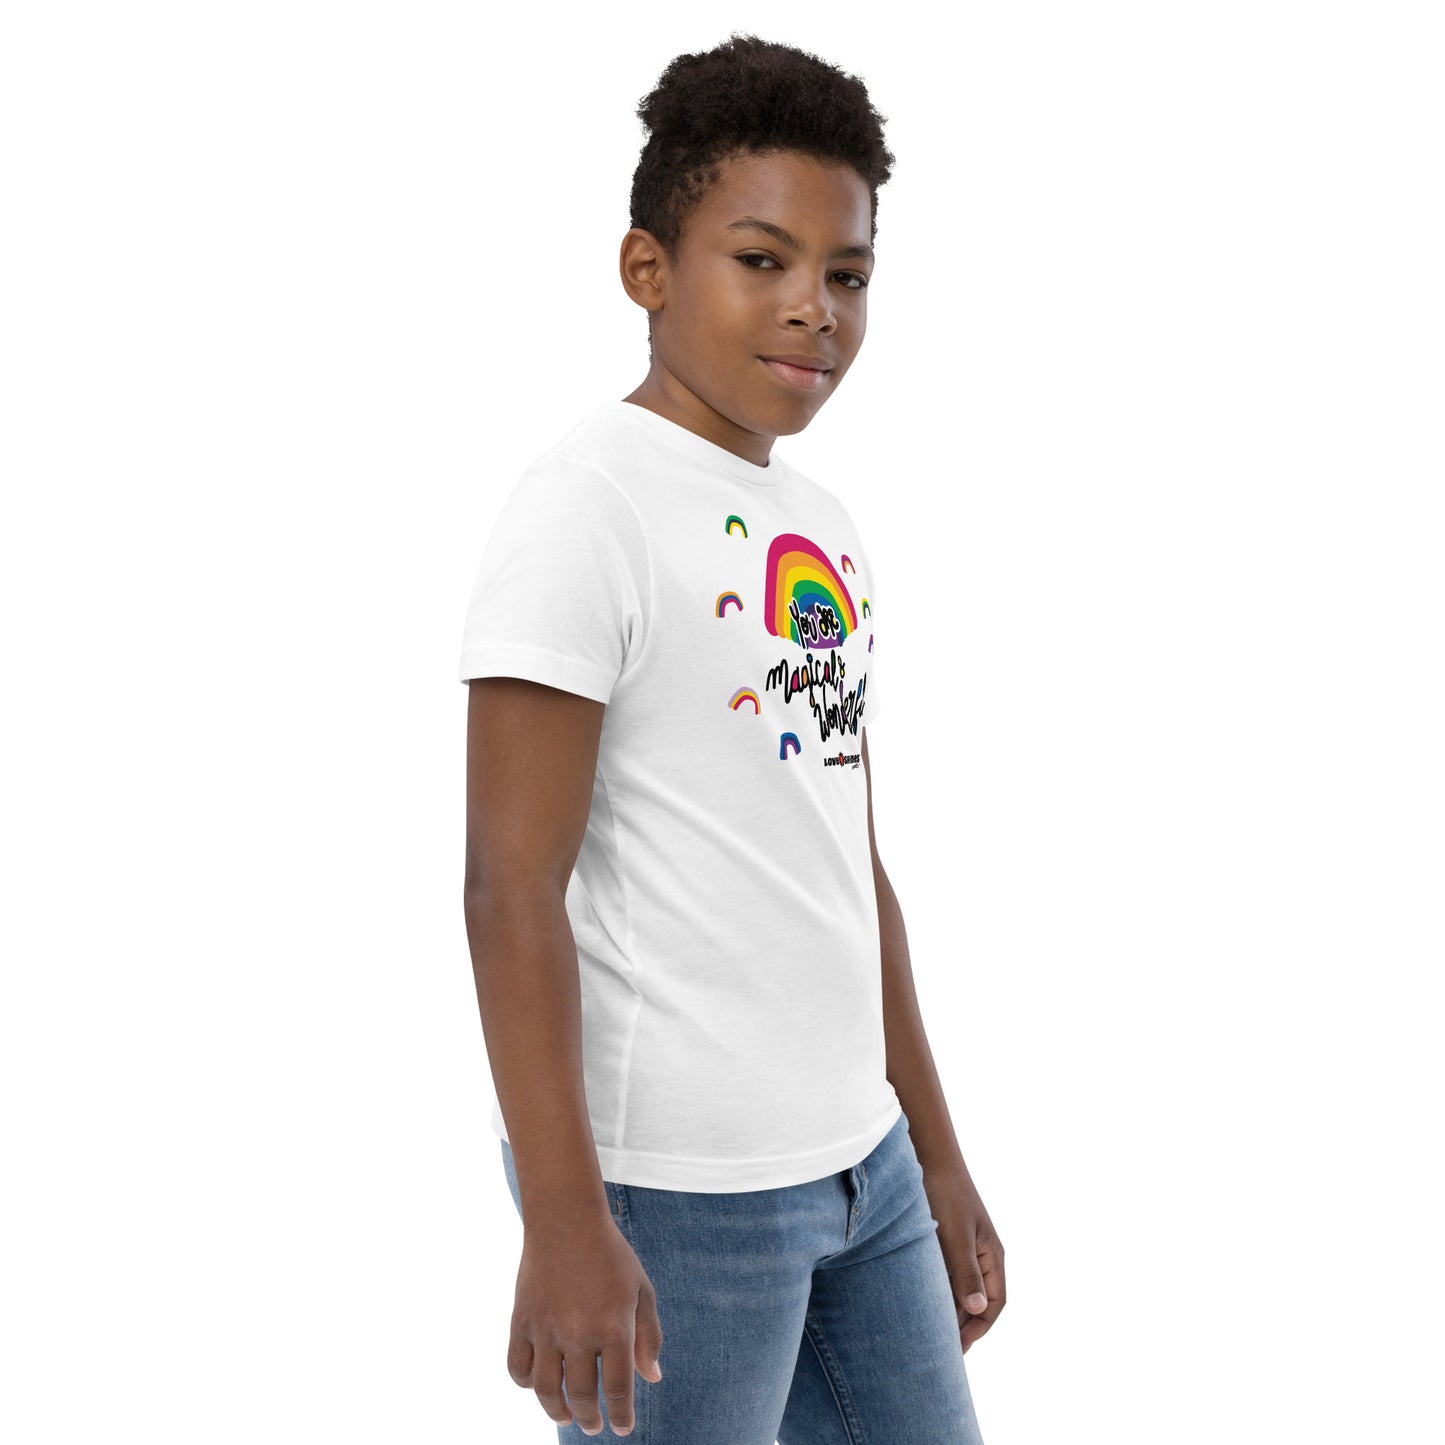 you are magical and wonderful - youth jersey t-shirt